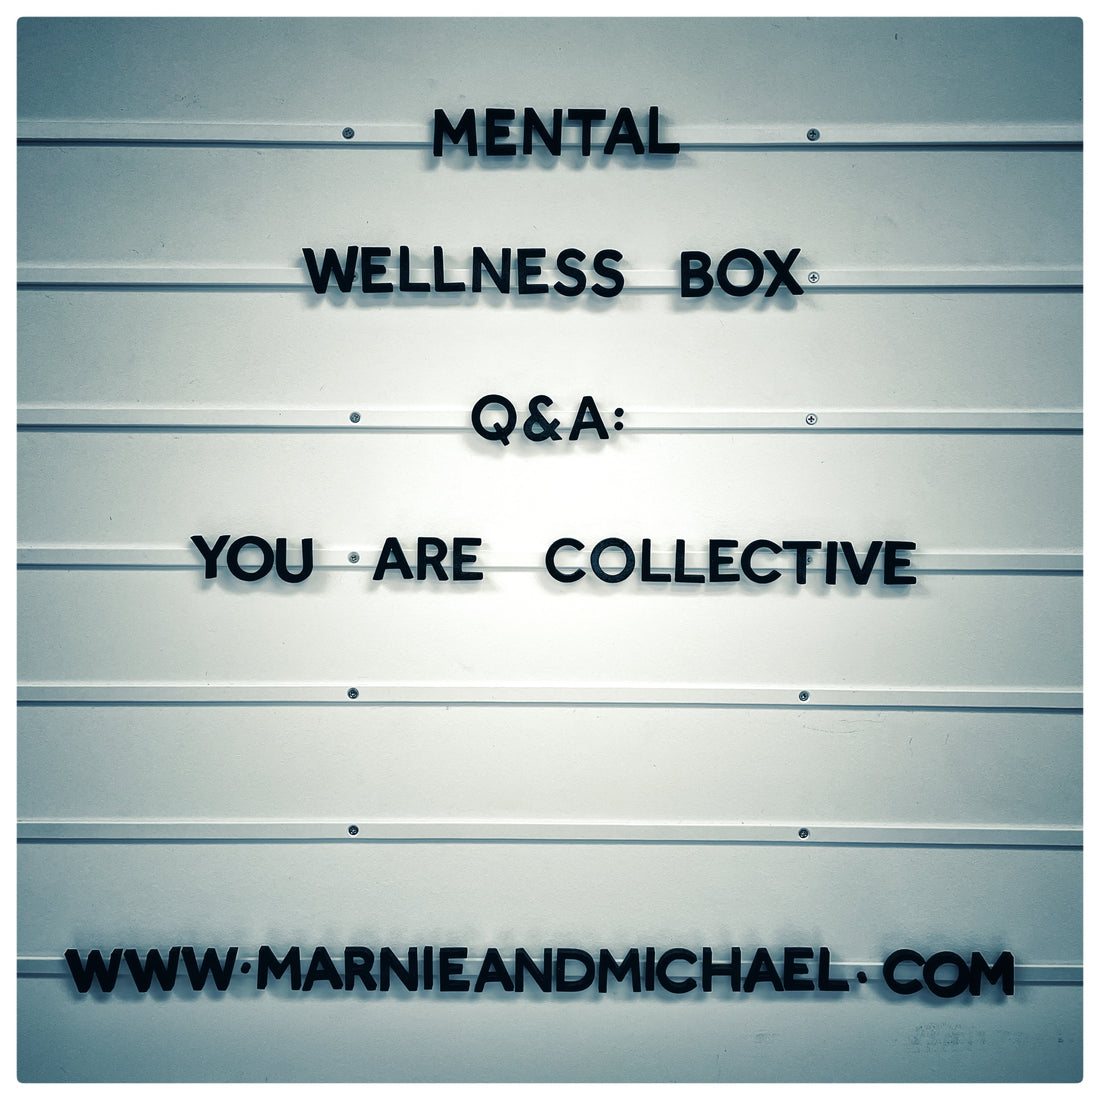 MENTAL WELLNESS BOX 'Q&A': YOU ARE COLLECTIVE